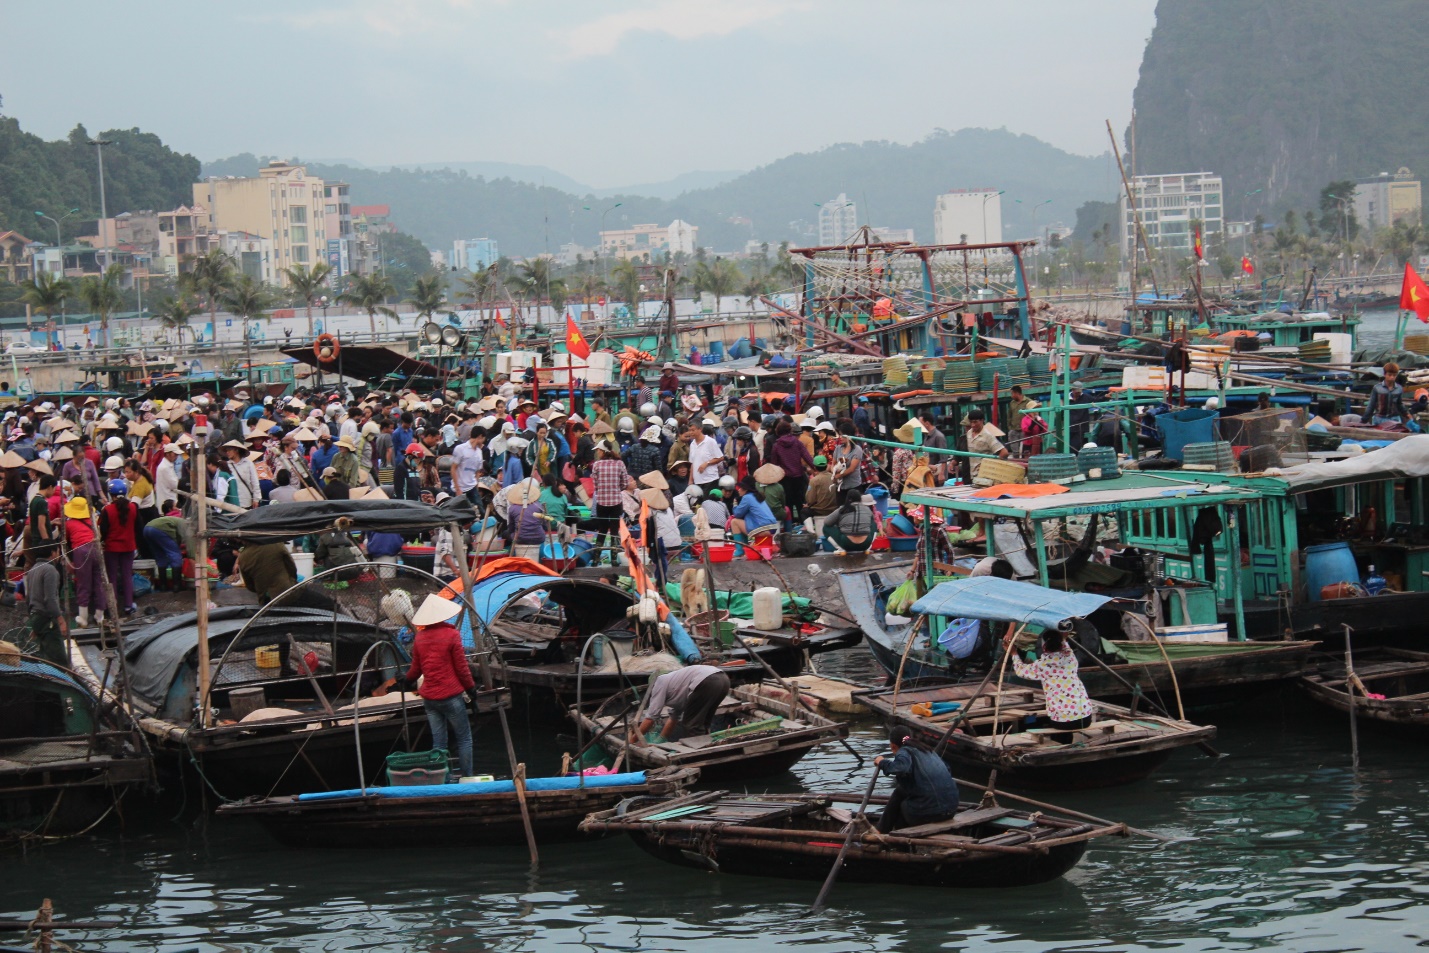 The morning fish market is crowded in rush hour